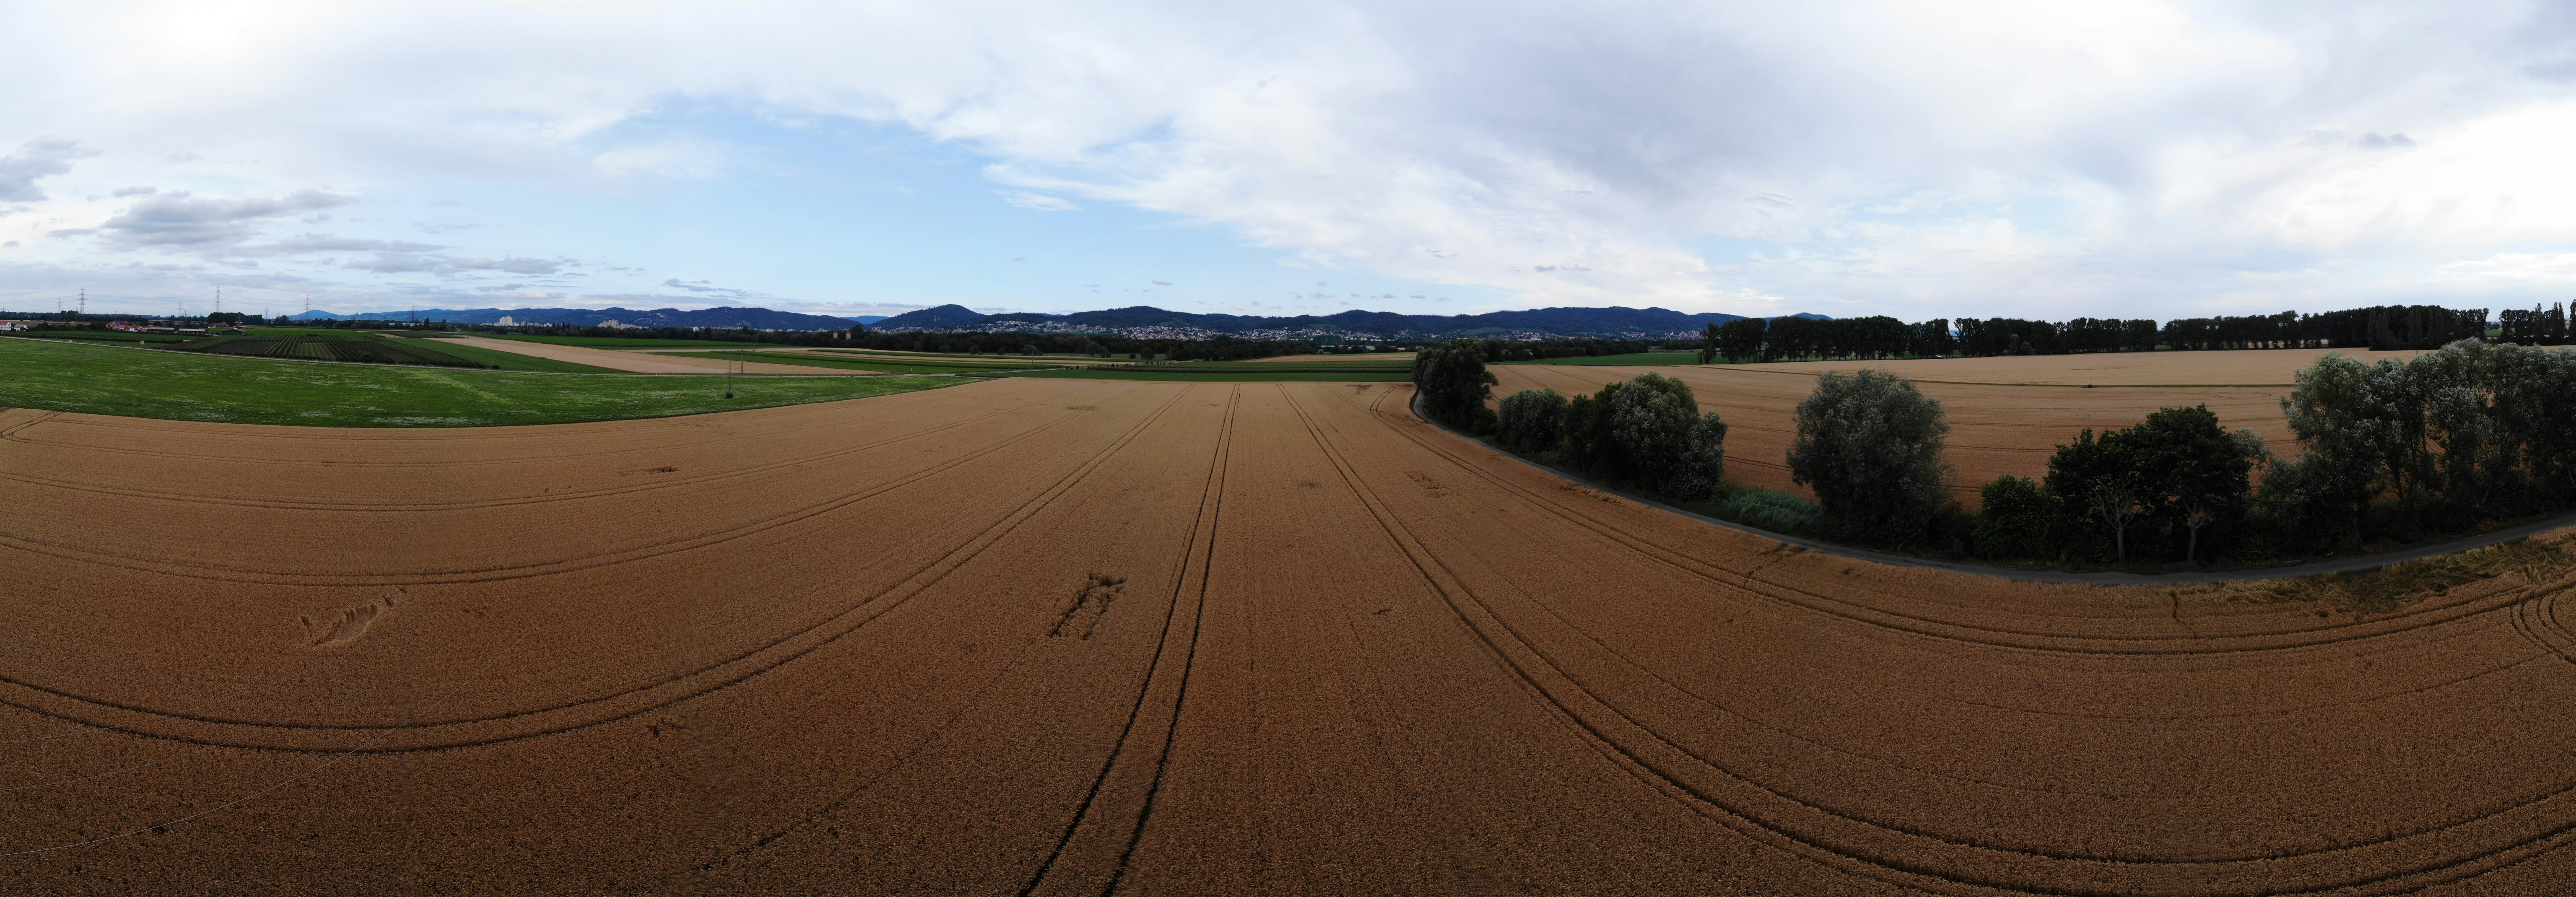 panoramic photography of an open field during daytime